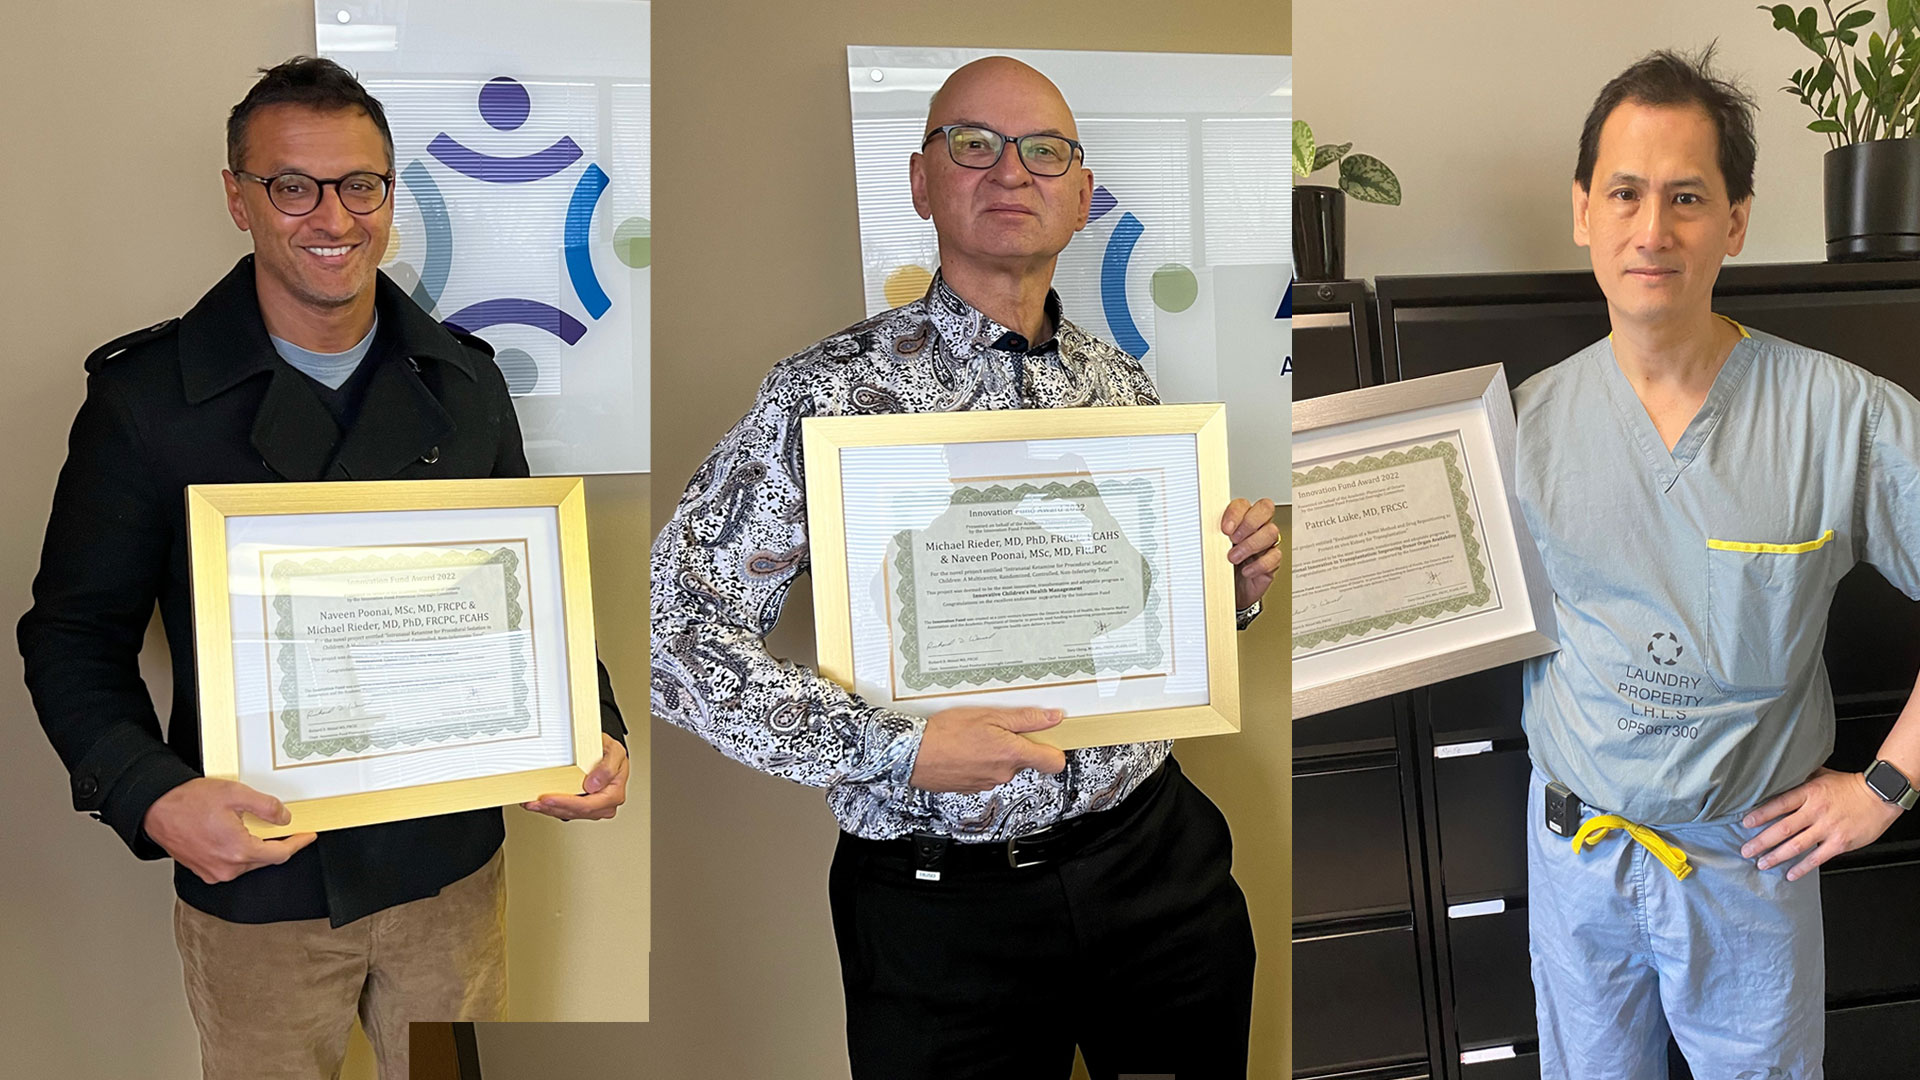 Dr. Naveen Poonai, Dr. Michael Rieder and Dr. Patrick Luke hold their Innovation Fund Award certificates. (Source: AMOSO)